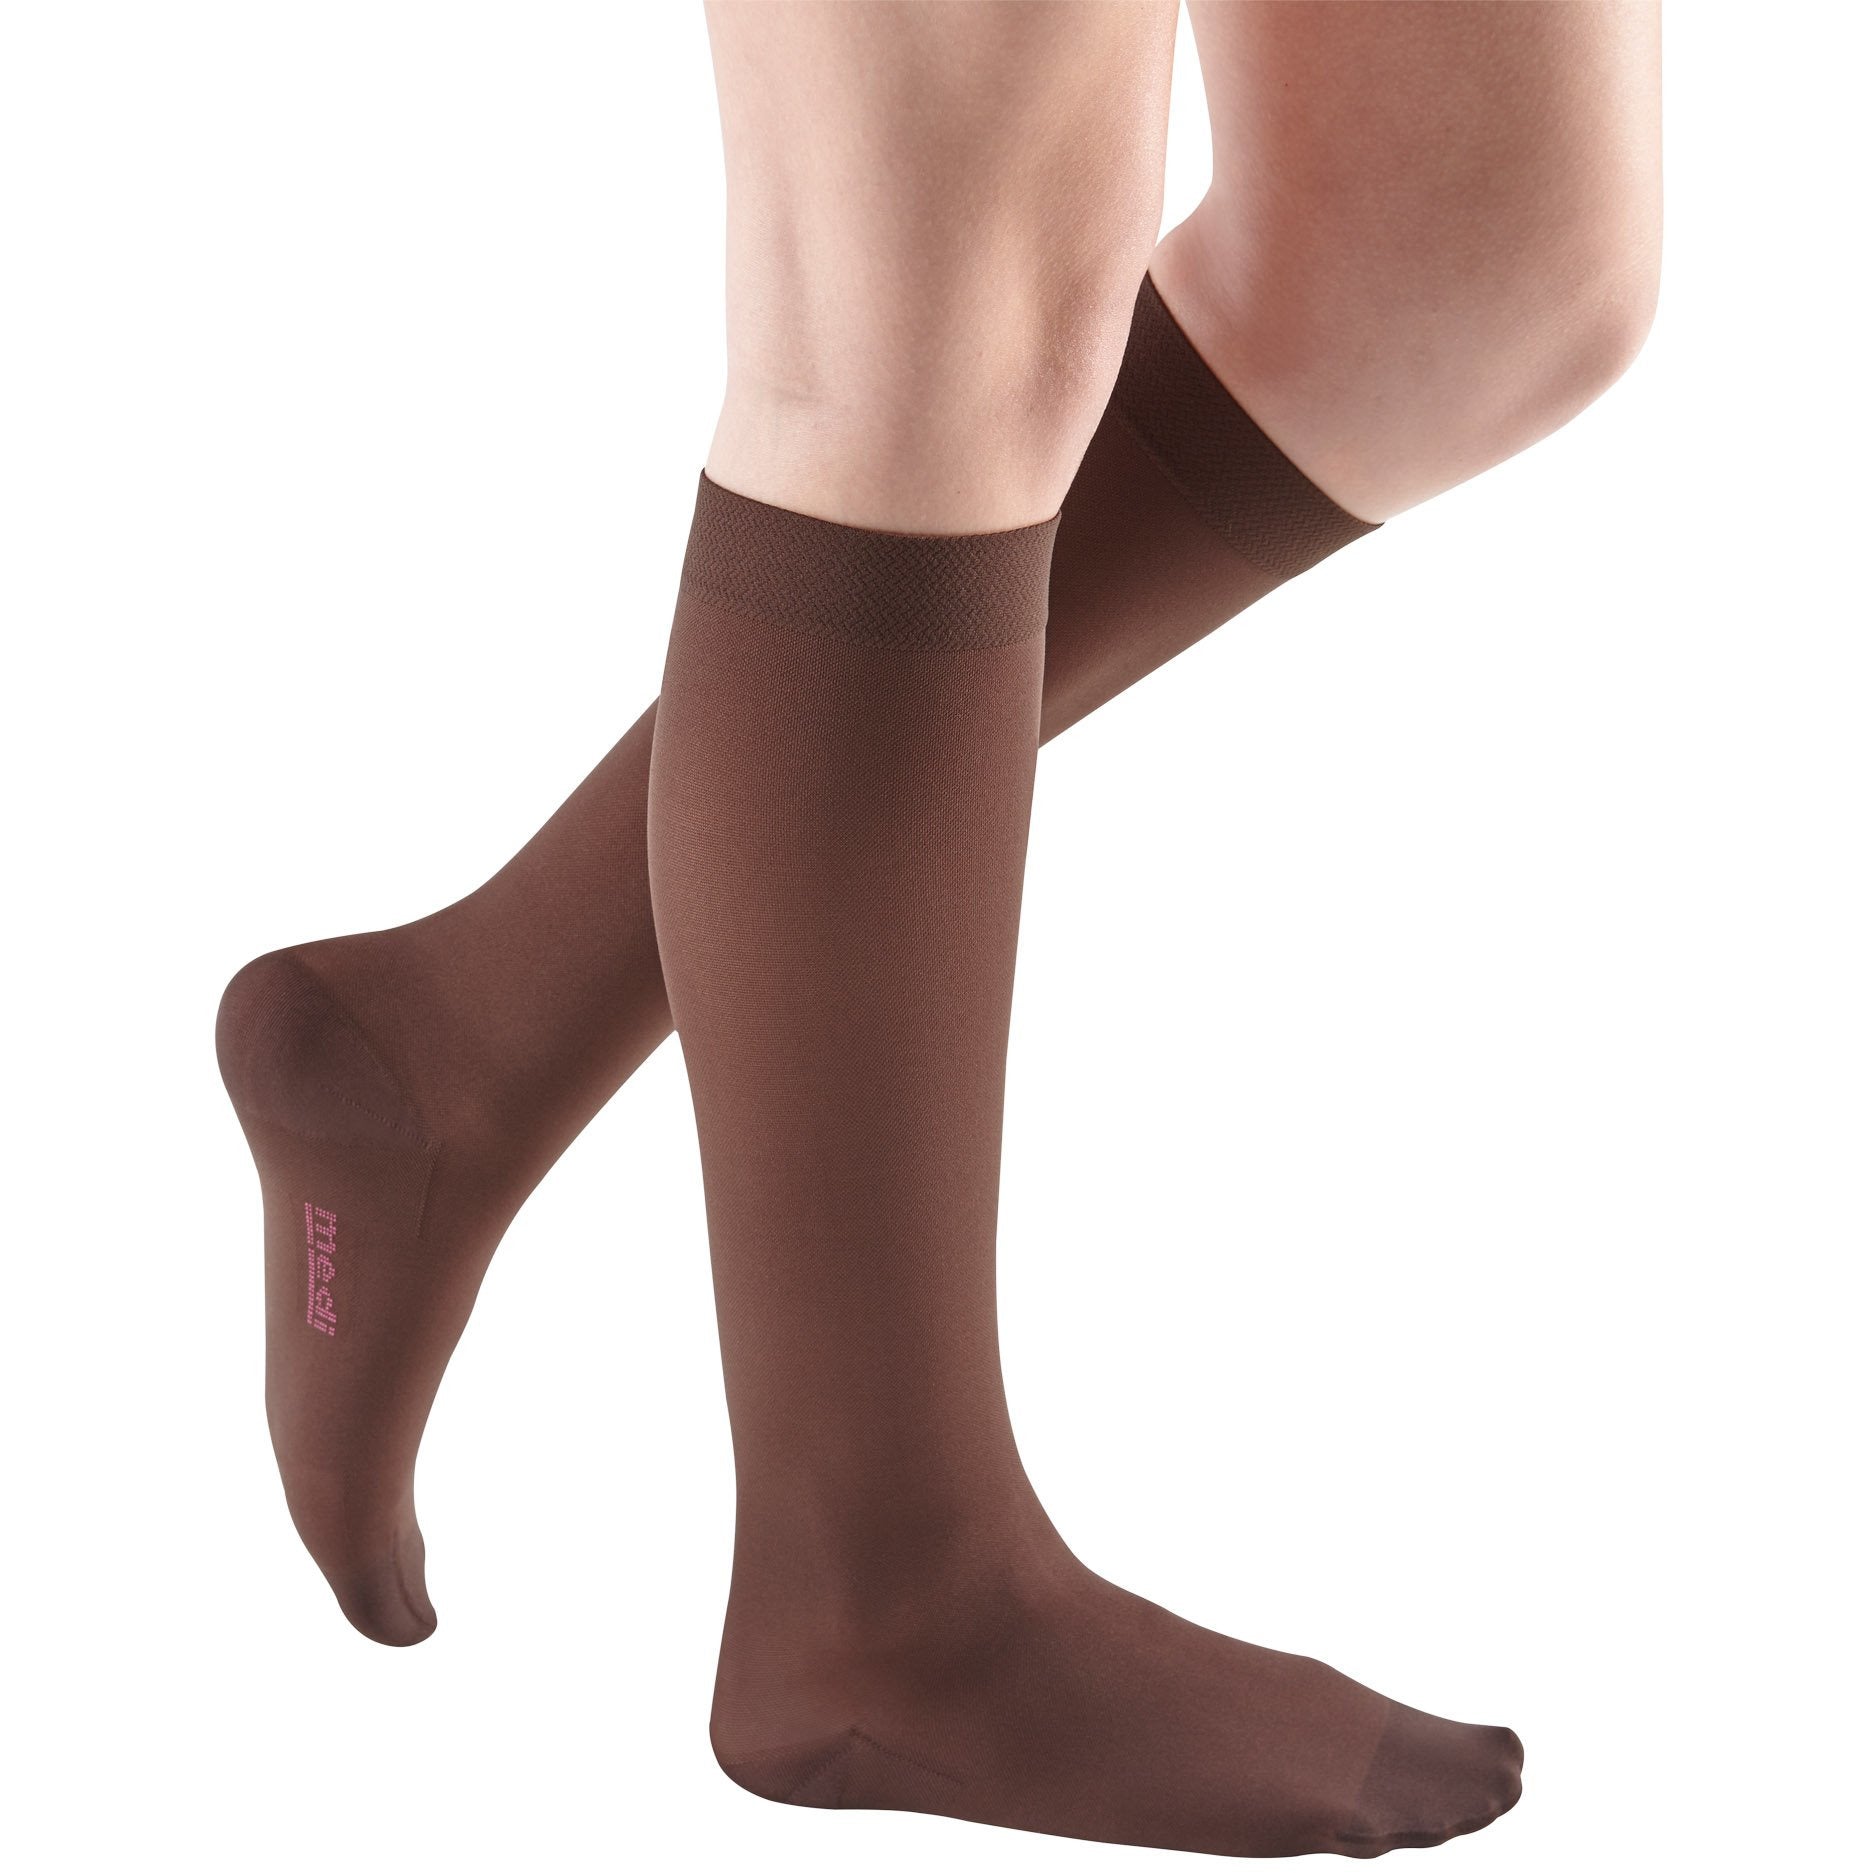 Compression Socks, Open Toe, 15-20 mmHg Graduated Compression Stockings for  Men Women, Knee High Compression Sleeves for DVT, Maternity, Pregnancy